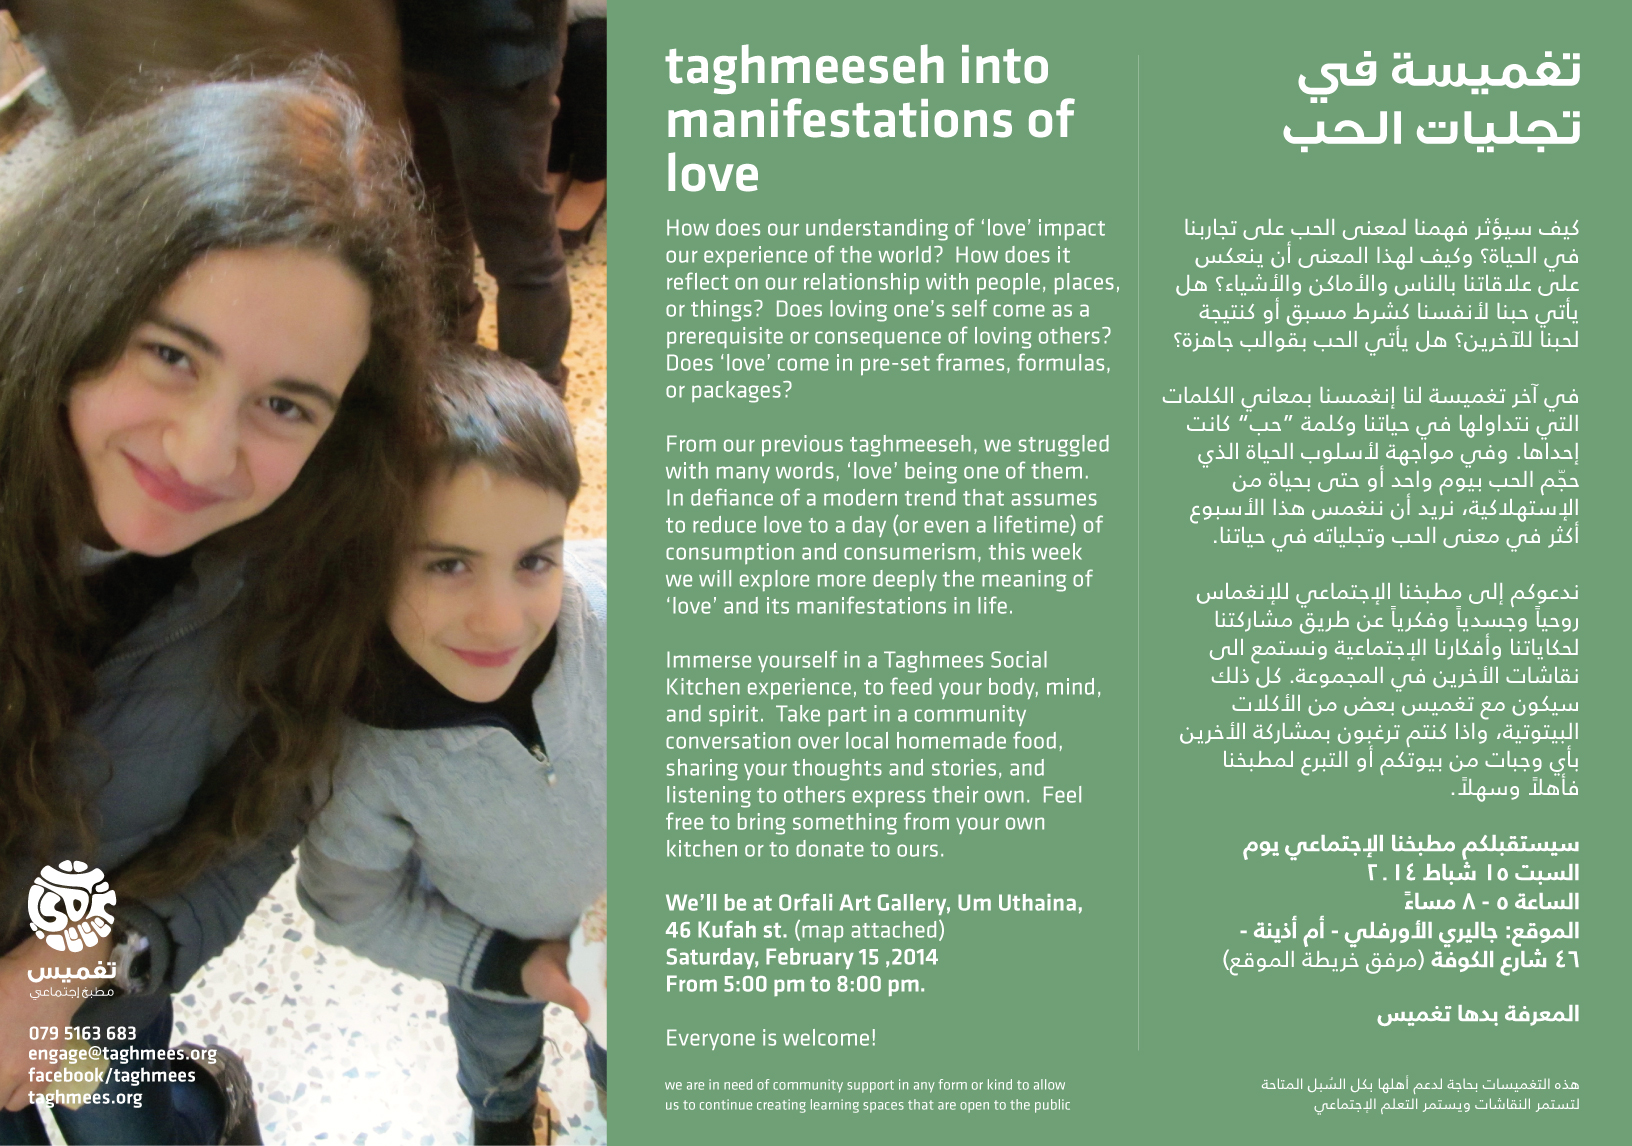 Taghmeeseh-into-manifestations-of-love